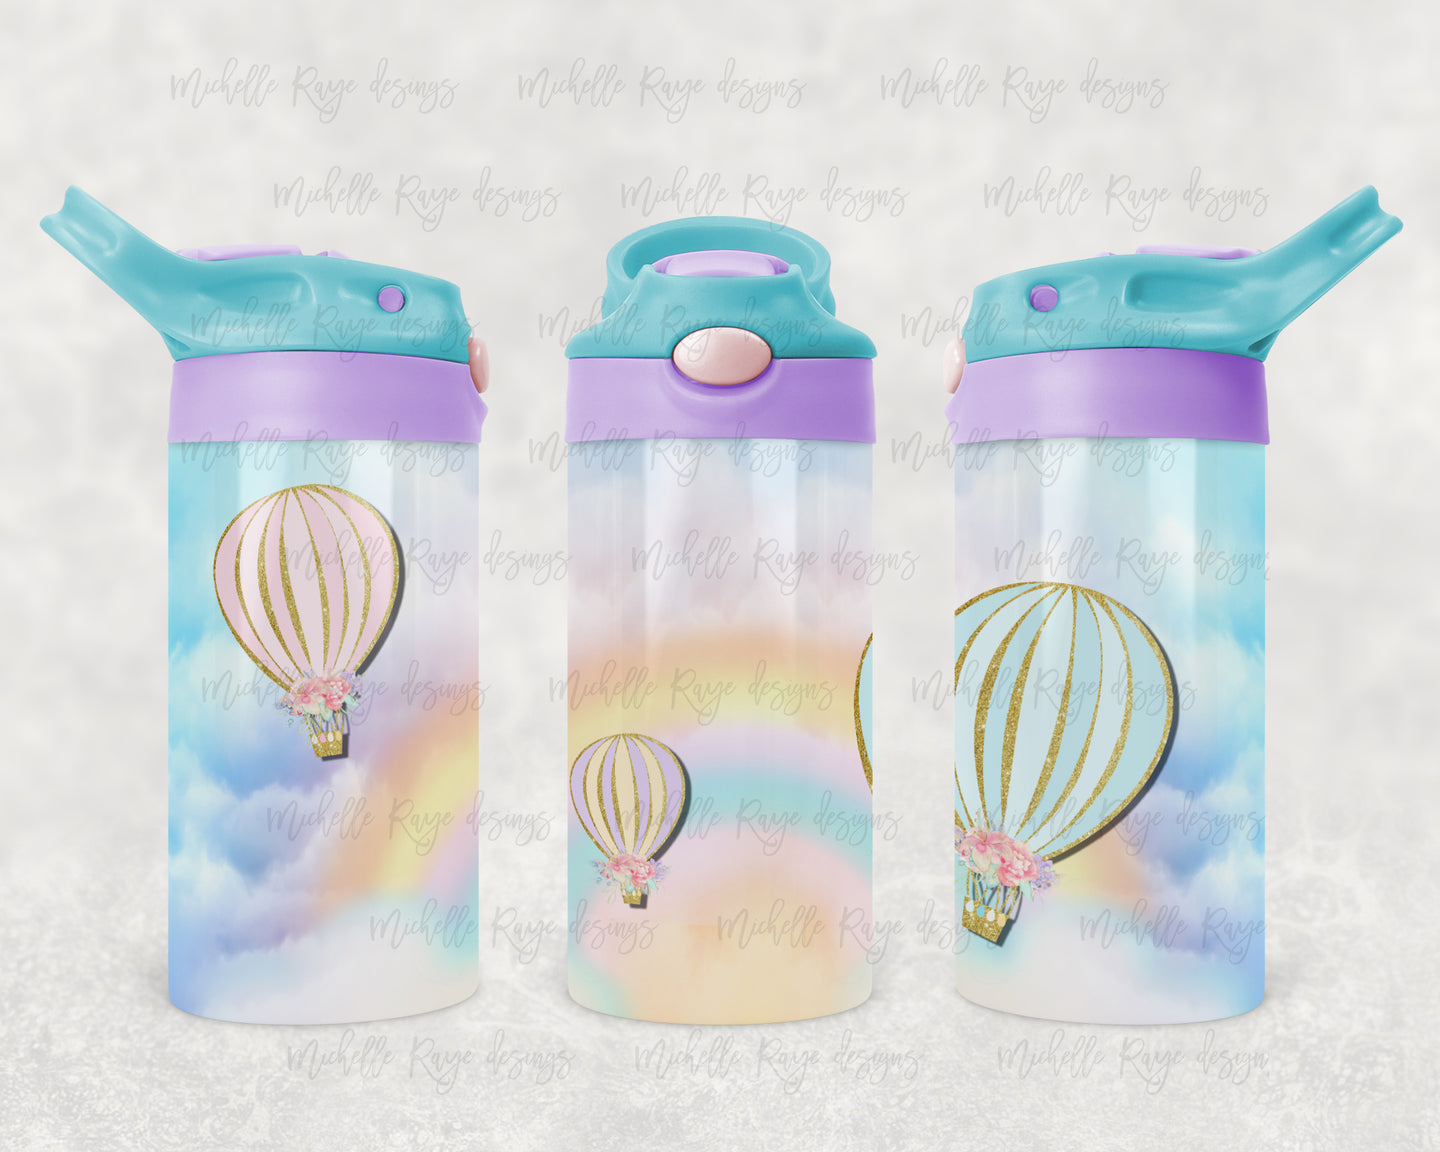 Kids Pastel and Gold Glitter Hot Air Balloons in Blue Sky